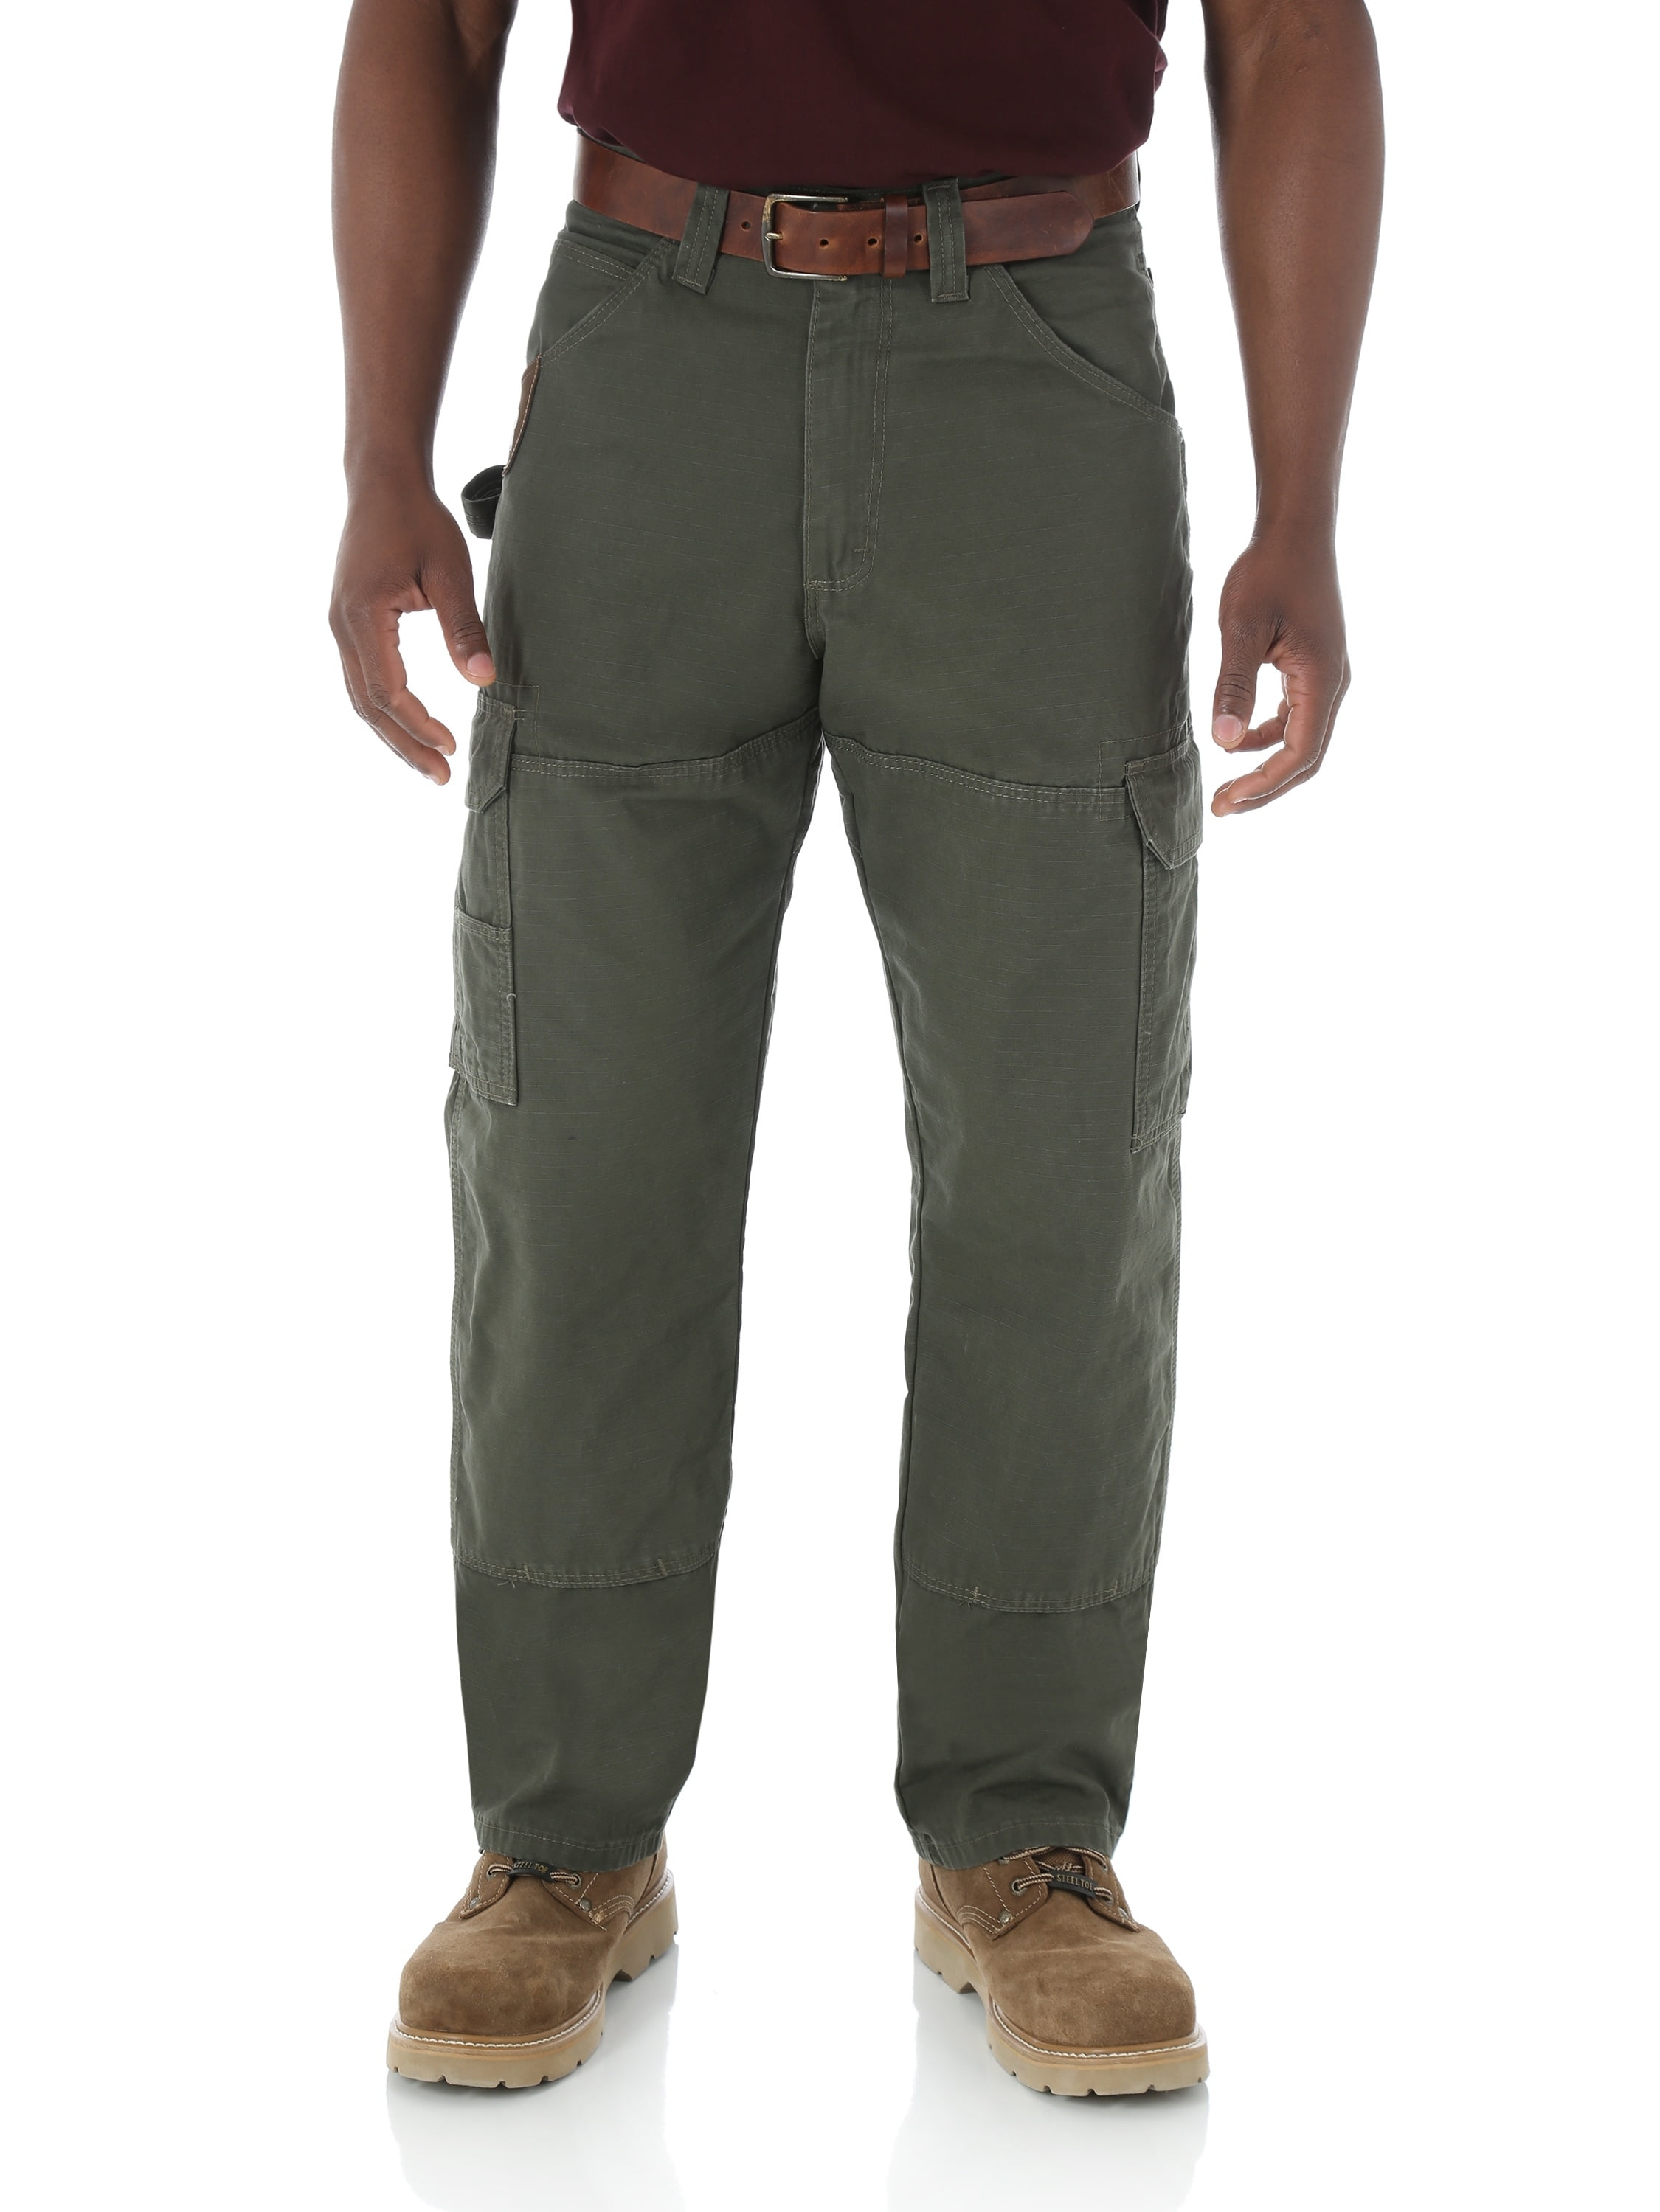 Details about   Mens Cargo Workwear Pant Security Knee Protection Utility Work Trousers Pocket 